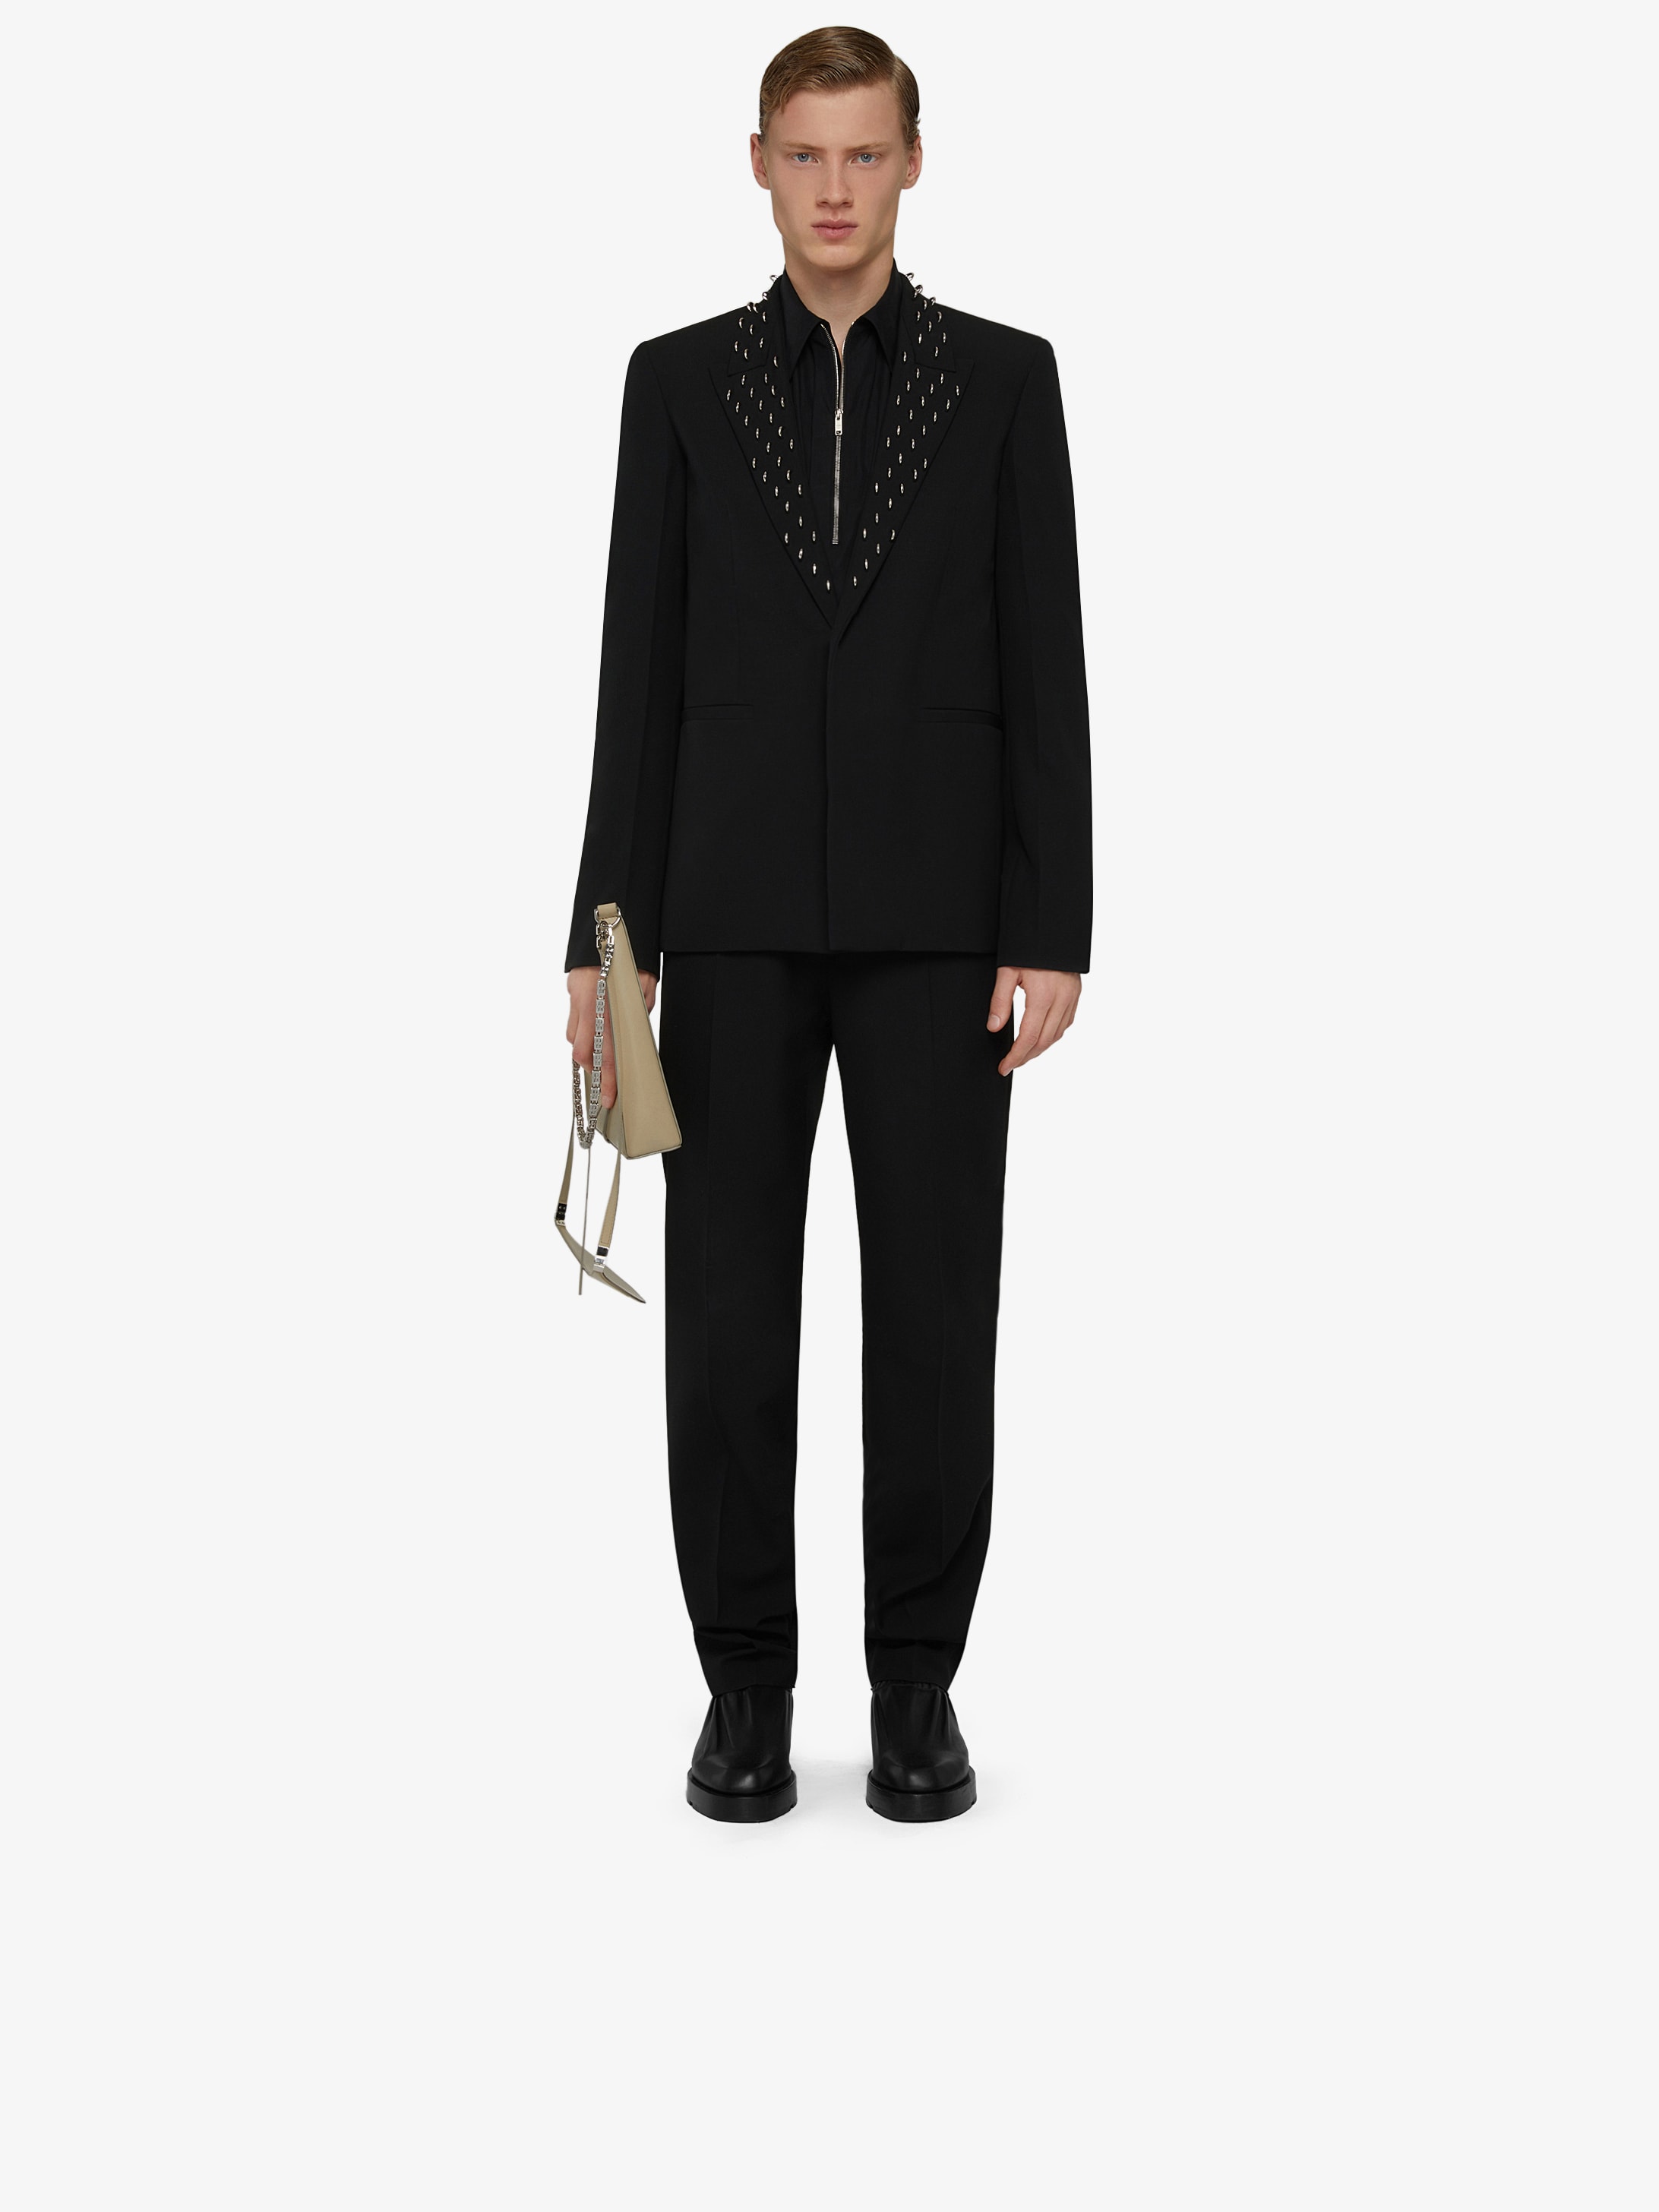 Slim fit jacket in wool with embroidered collar | GIVENCHY Paris